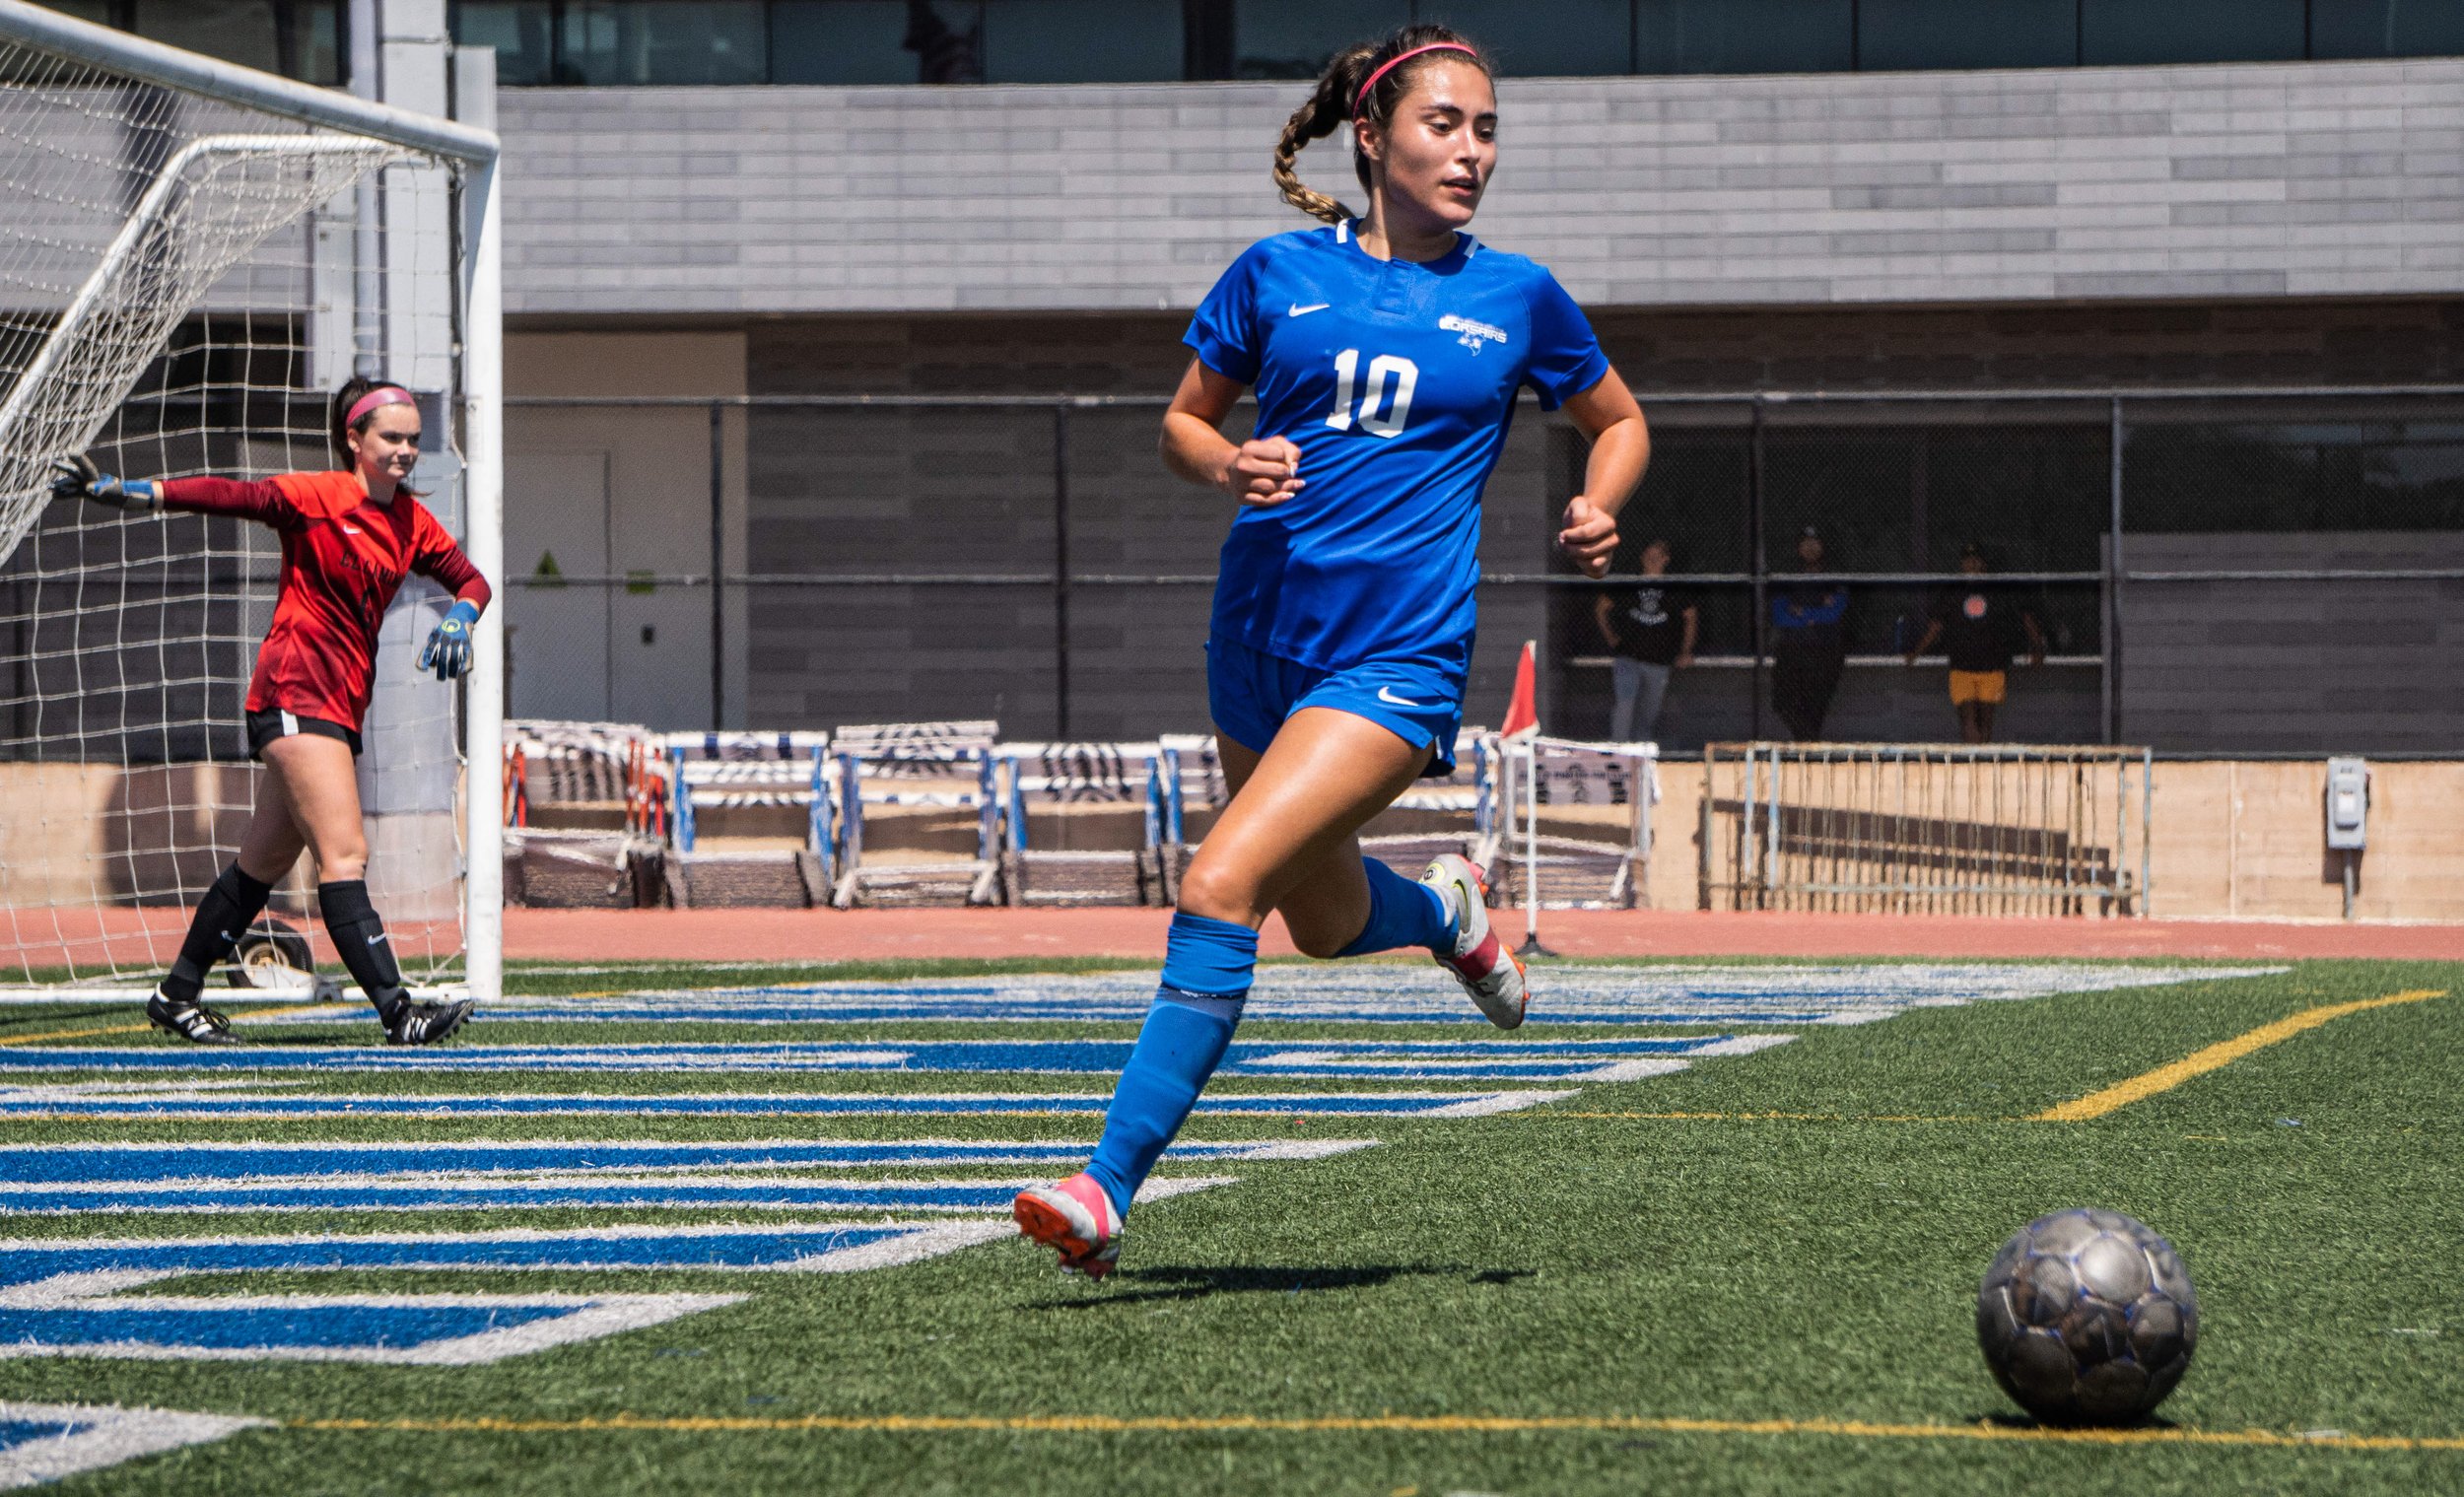  Santa Monica College Corsairs Women's Soccer midfielder Ali Alban (10) scored one out of two of the team's winning goals for their match against El Camino College. The Corsair Field in Santa Monica, Calif. On Friday, September 2, 2022. (Tsen Ee Lin 